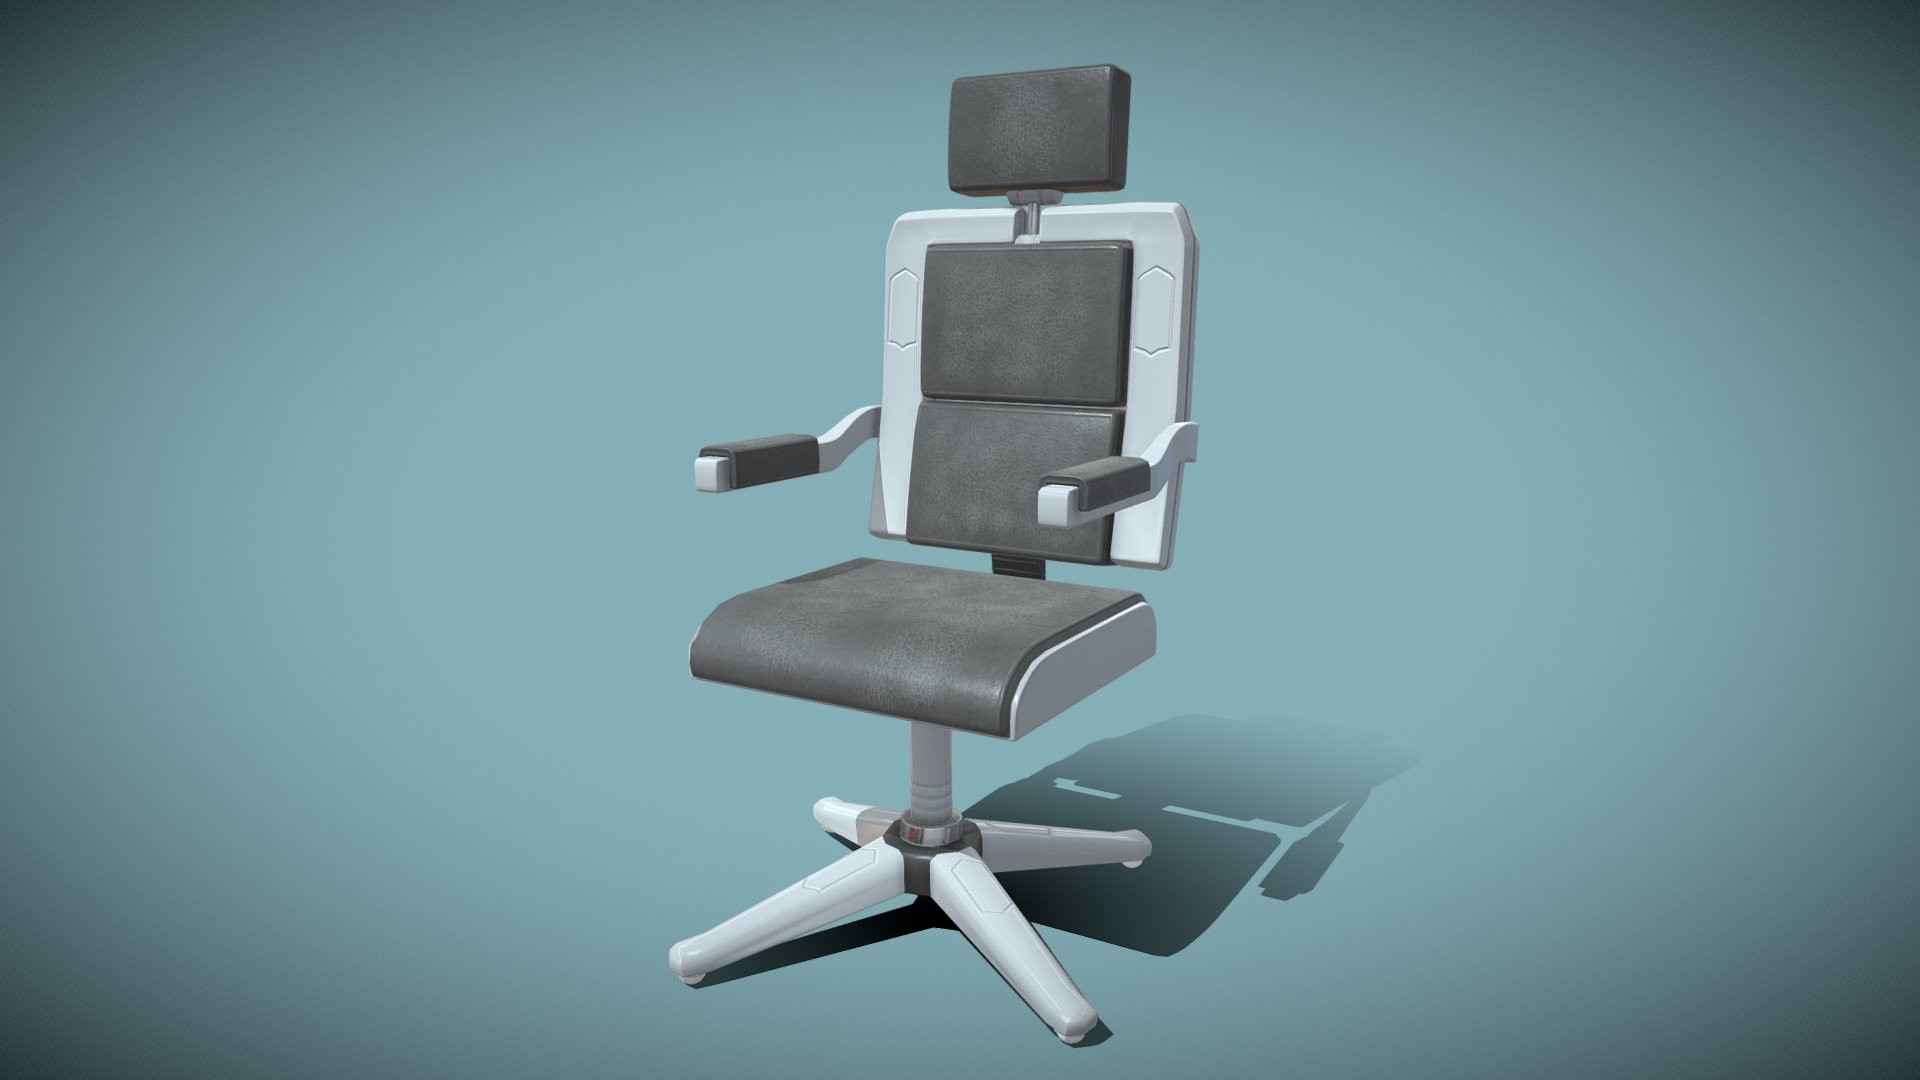 Sci-Fi Chair Modeled in Blender, Textured in Substance Painter and Rendered in Marmoset Toolbag.
A Sci-Fi looking computer chair, although it kind of looks like a dentist chair as well :)
Watch the Video Process: https://youtu.be/VdqhDSc7jQc - Sci-Fi Chair - Download Free 3D model by Darren McNerney 3D (@DarrenMcnerney3D) 3d model